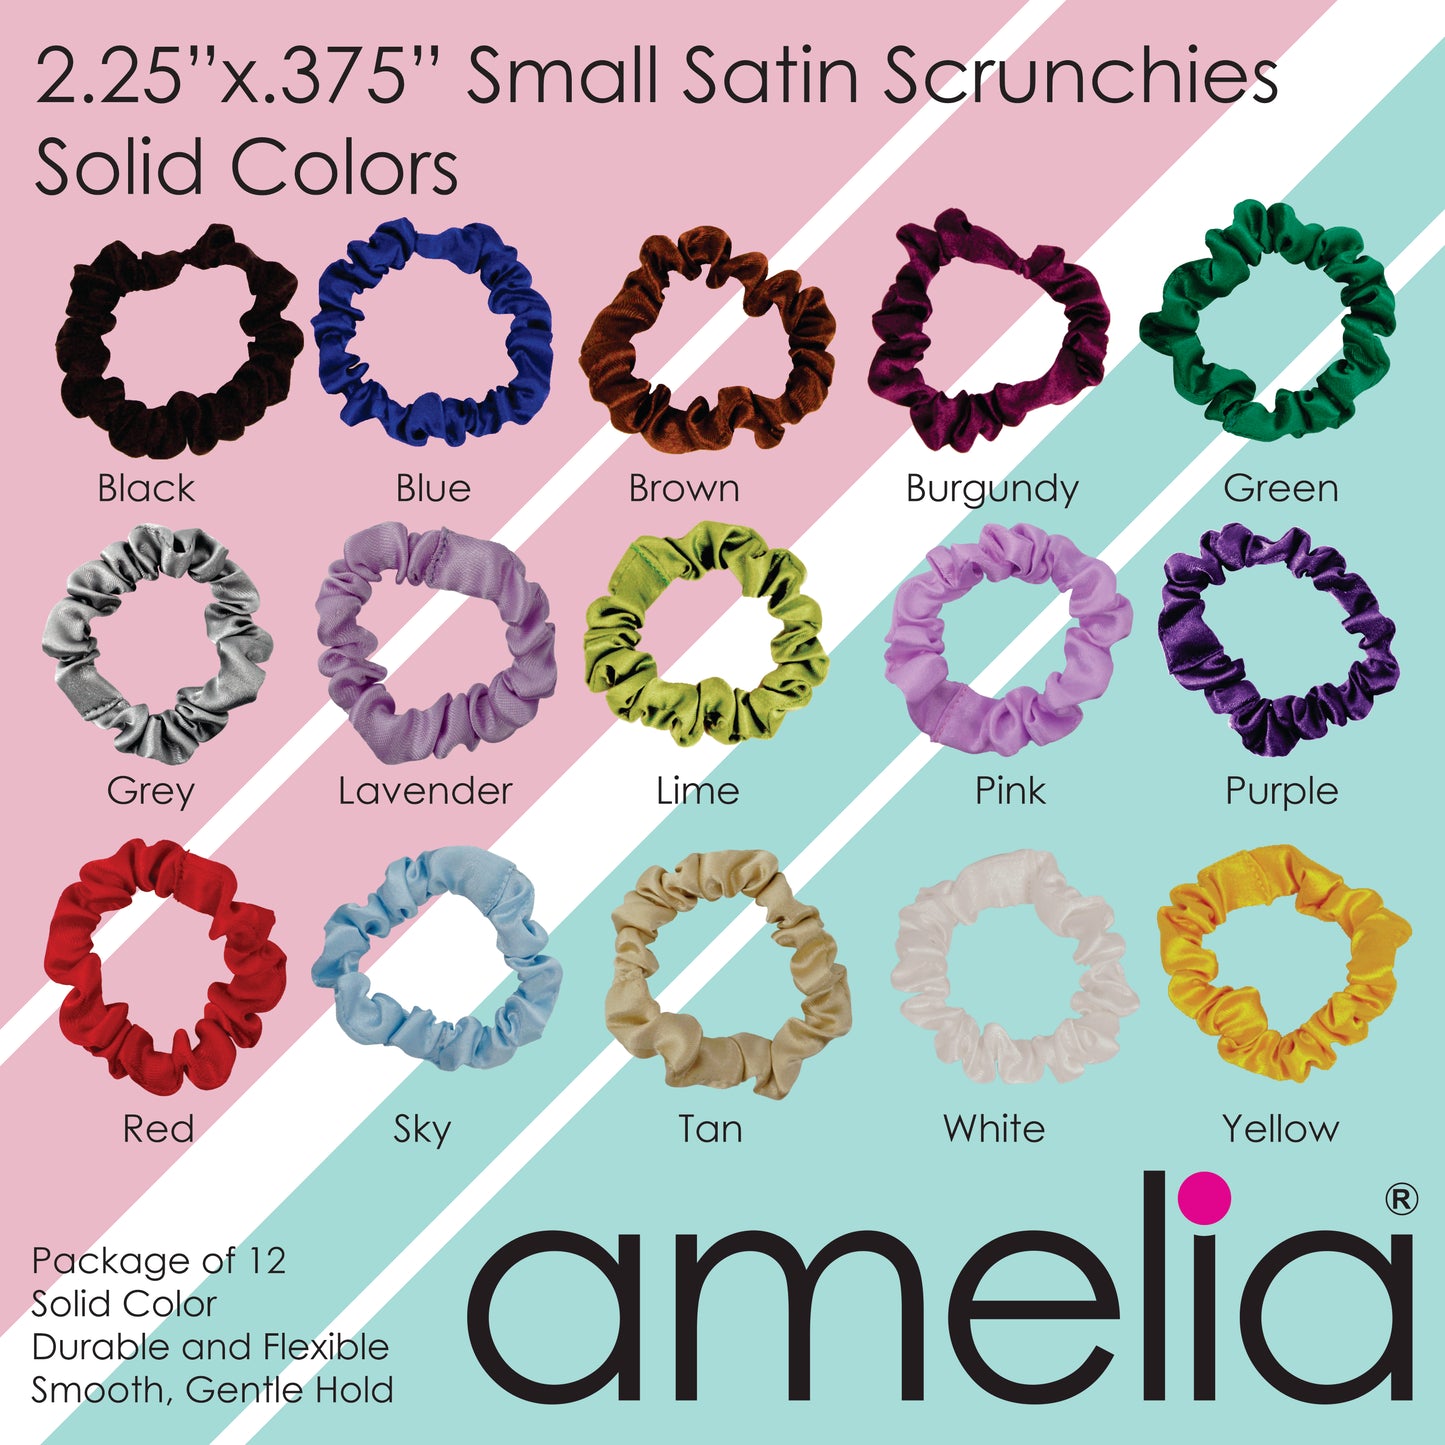 Amelia Beauty, Sky Satin Scrunchies, 2.25in Diameter, Gentle on Hair, Strong Hold, No Snag, No Dents or Creases. 12 Pack